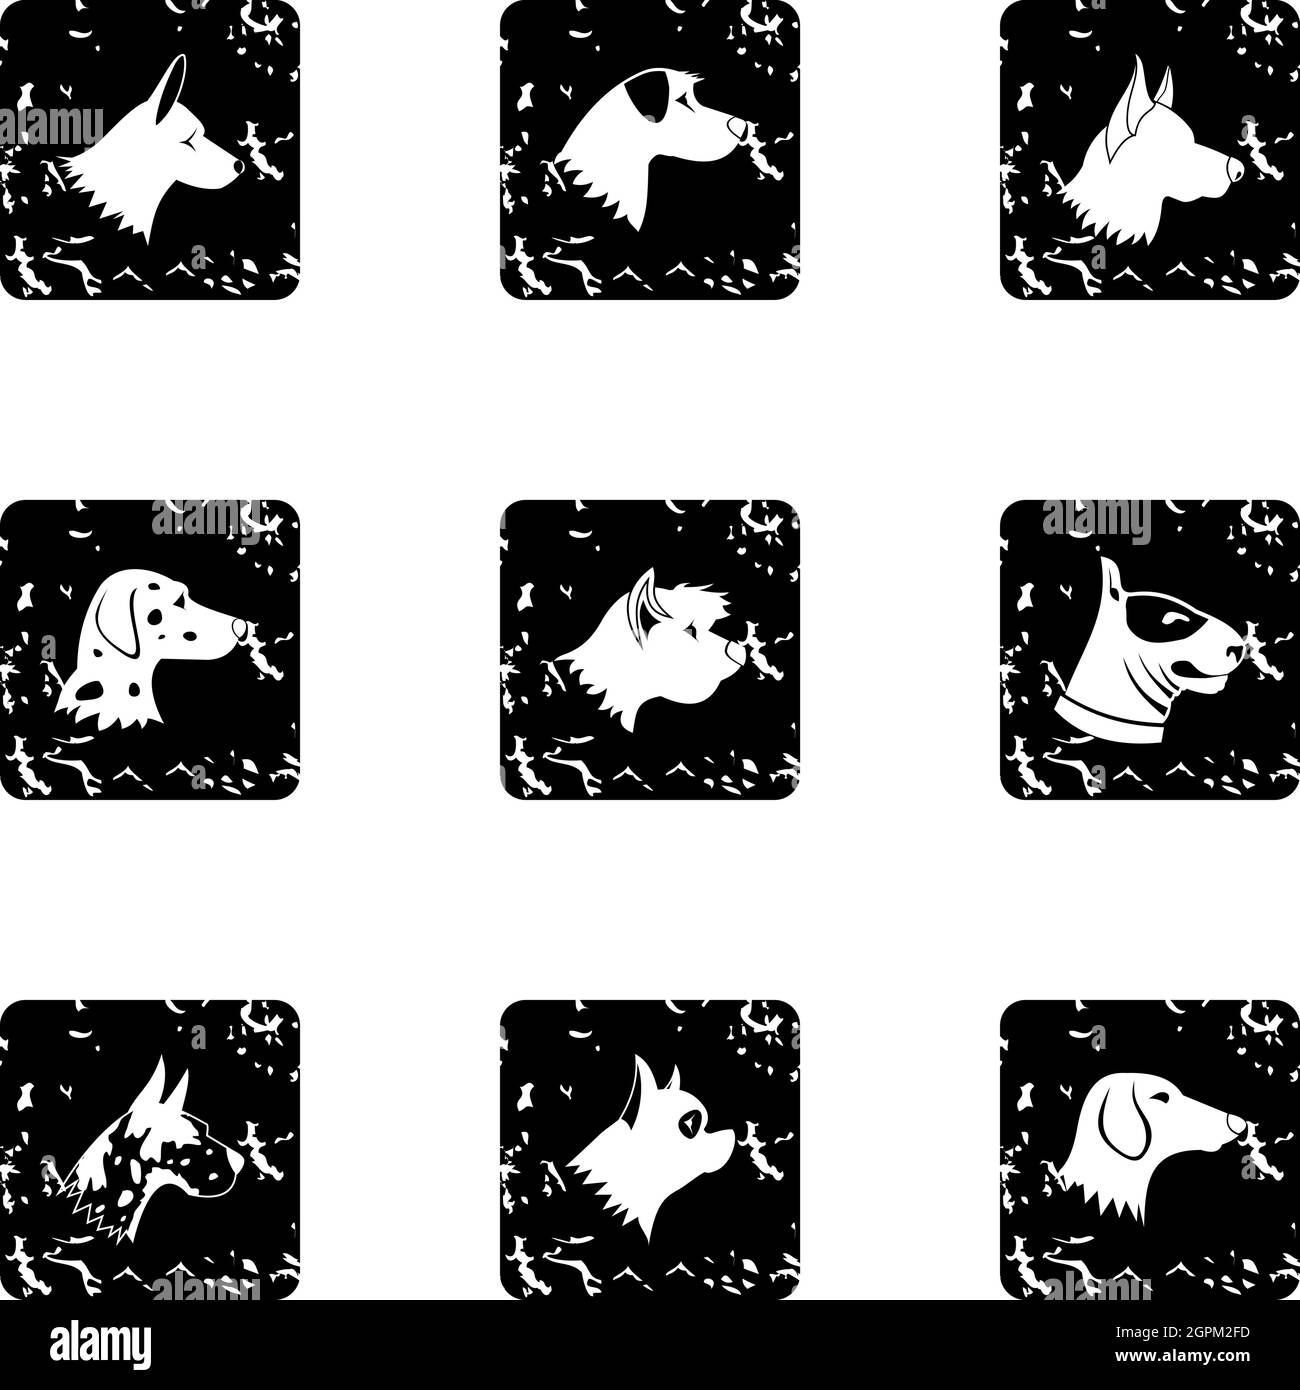 Types of dogs icons set, grunge style Stock Vector